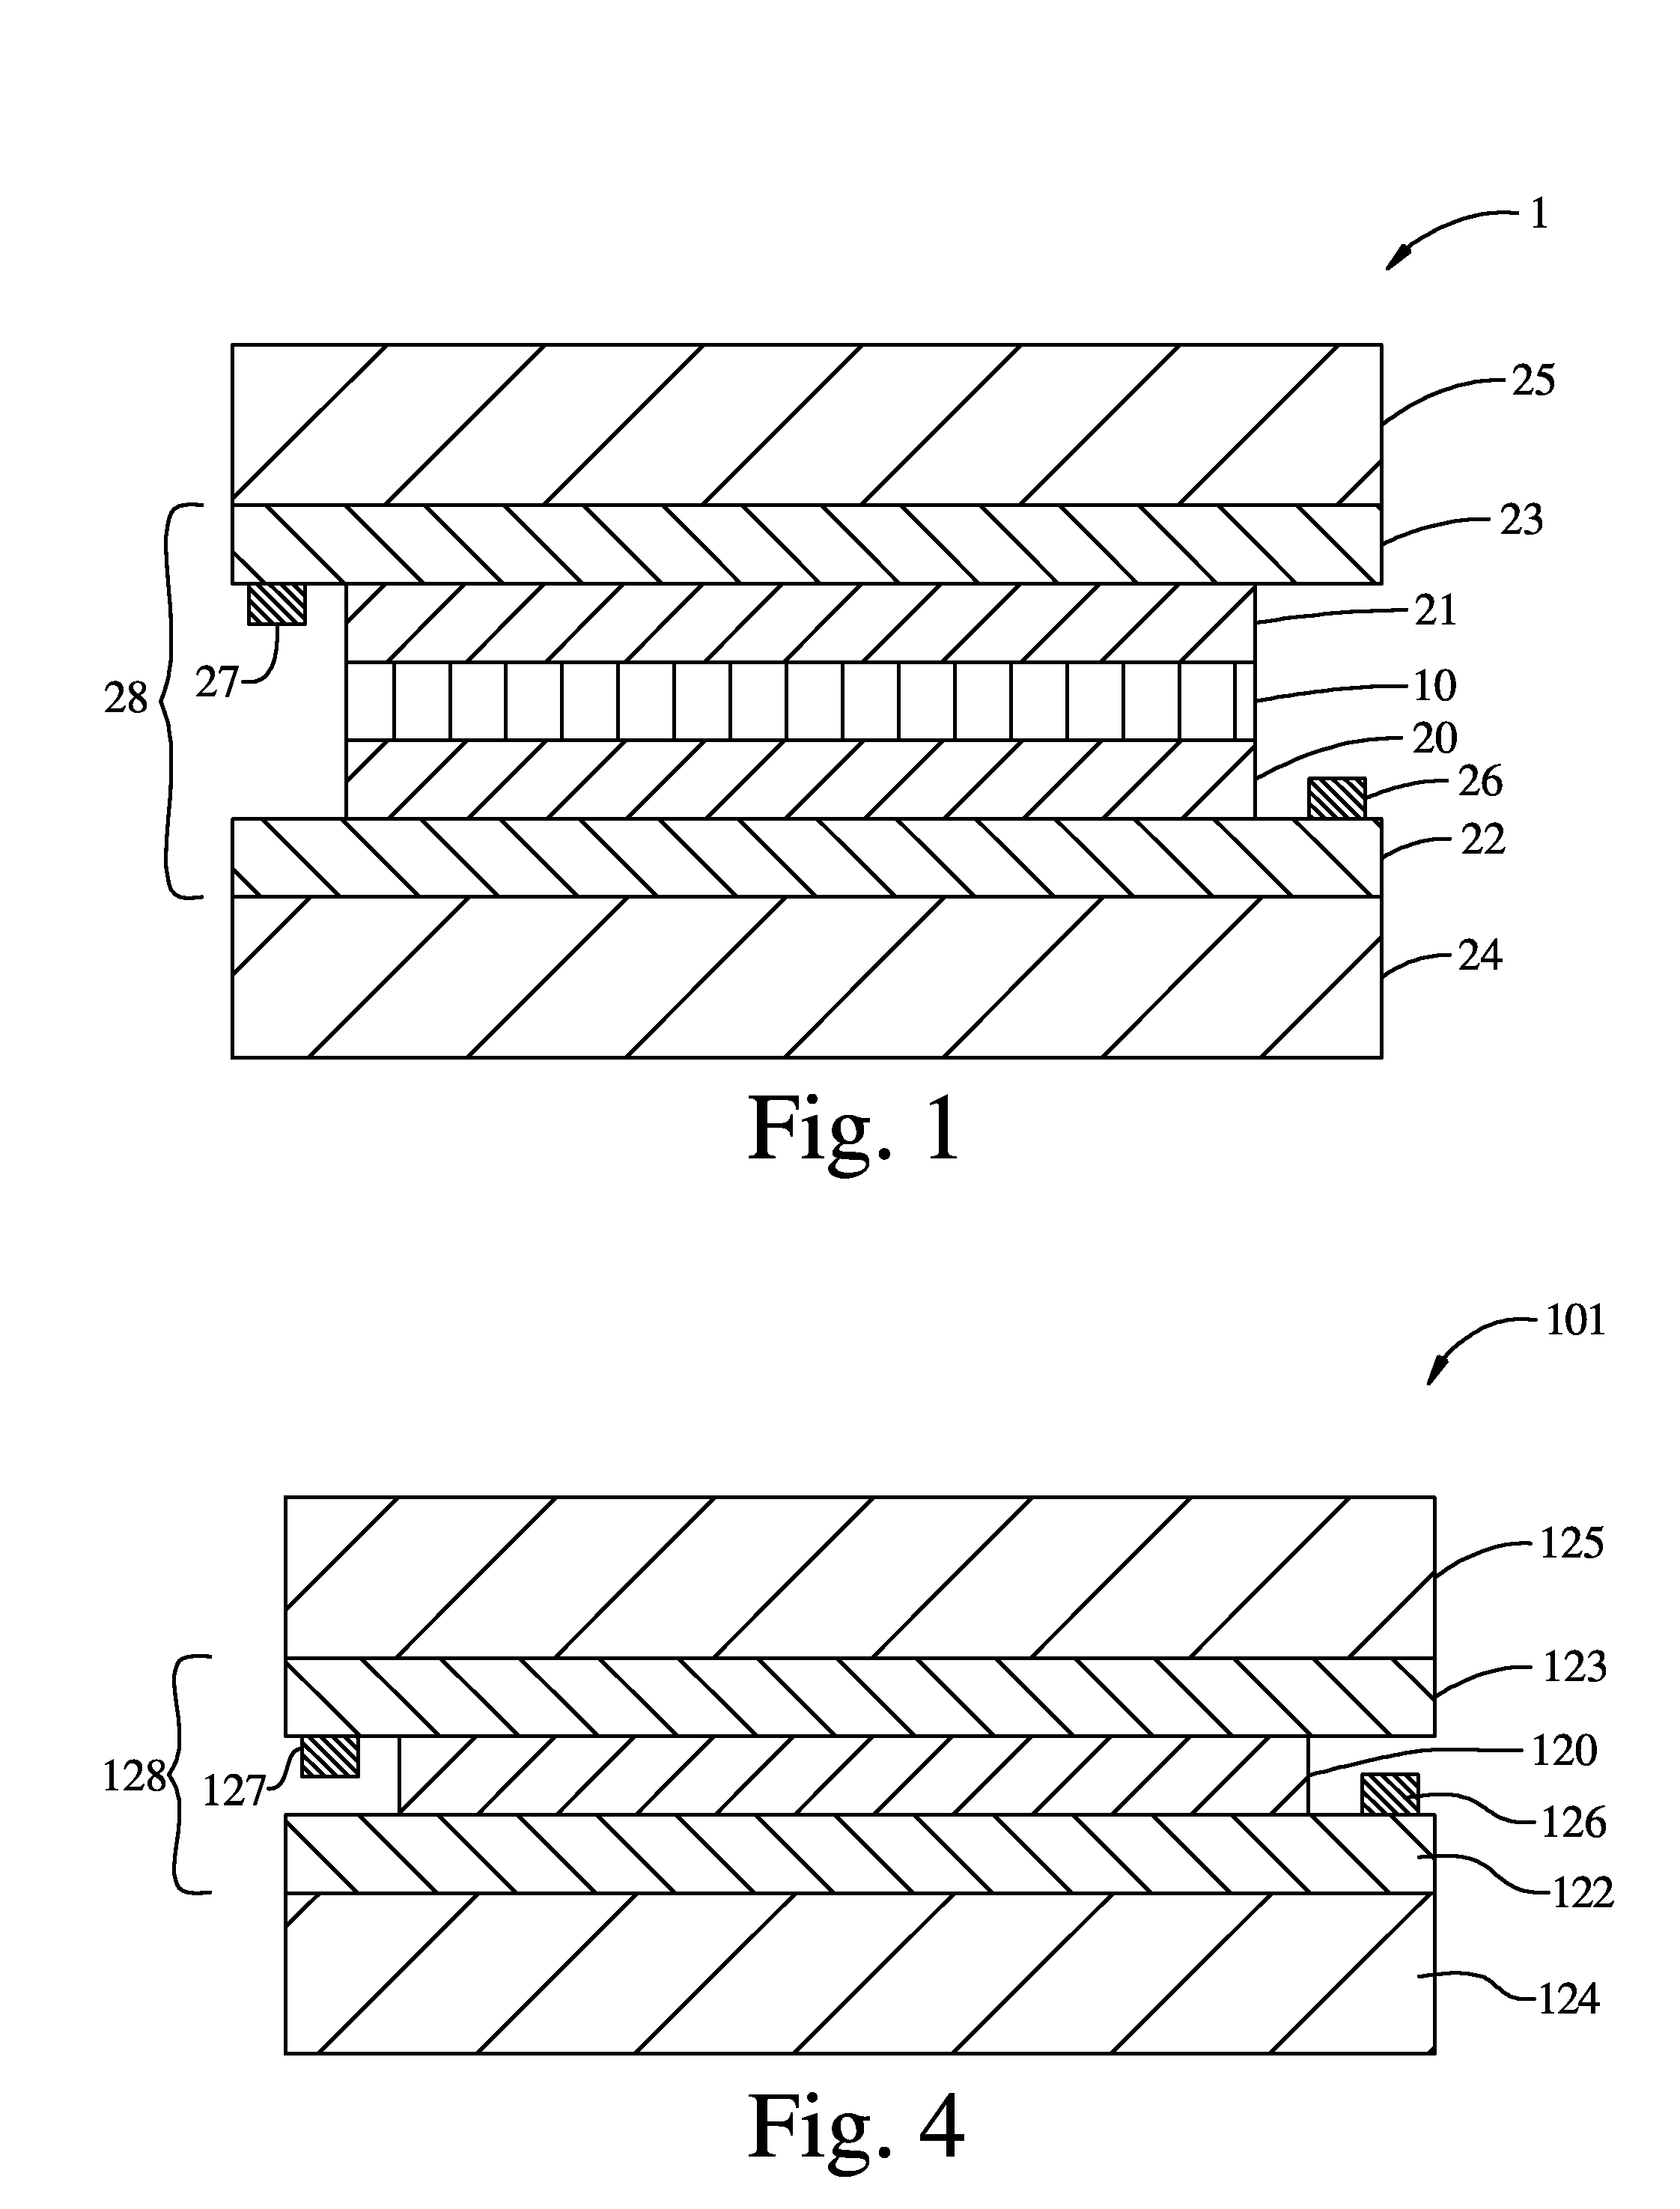 Electrochromic multi-layer devices with spatially coordinated switching